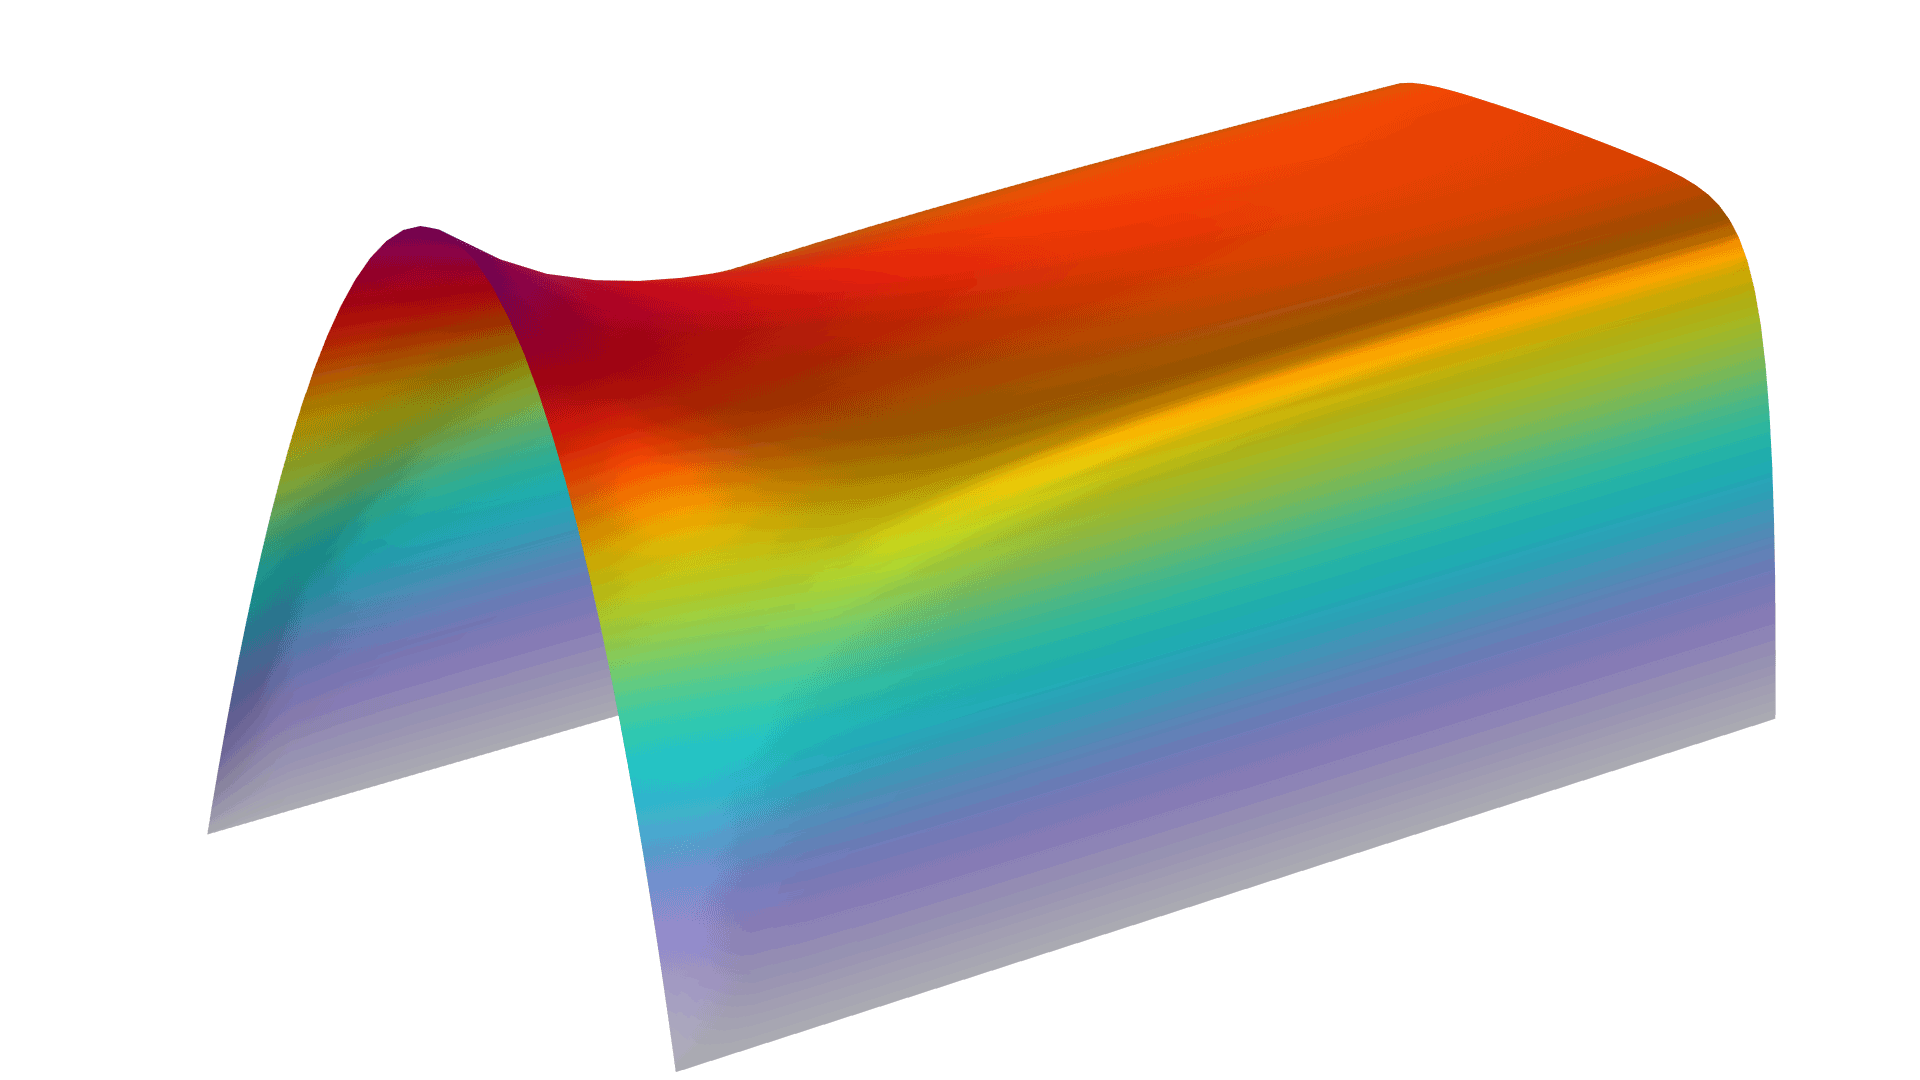 A magnetohydrodynamics model showing the magnetic field in the Prism color table.